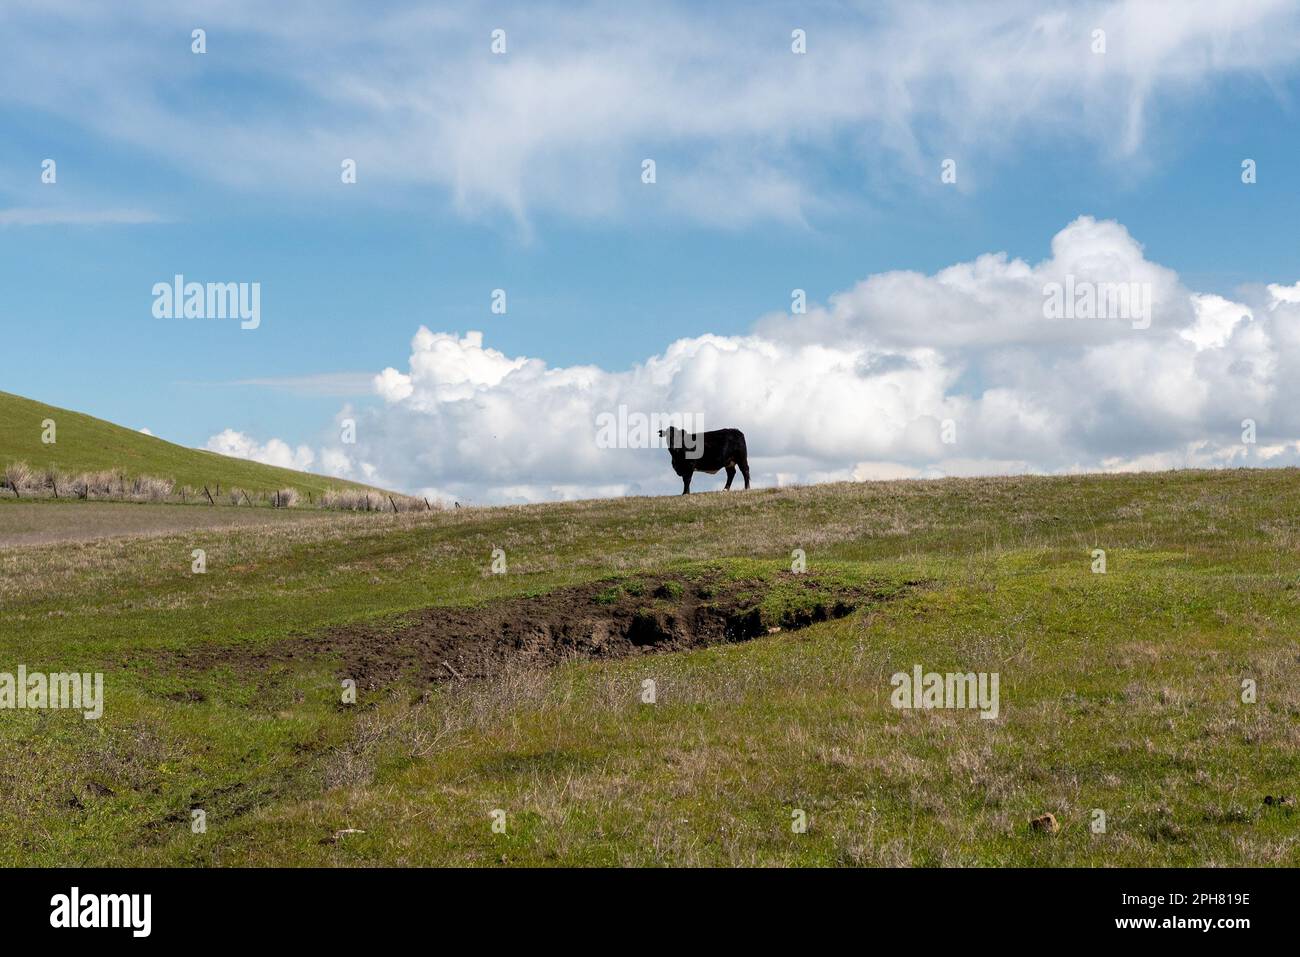 A black cow standing in front of a sinkhole in a pasture with green grass, against clouds copy space and blue sky, rural scene of California's Central Stock Photo